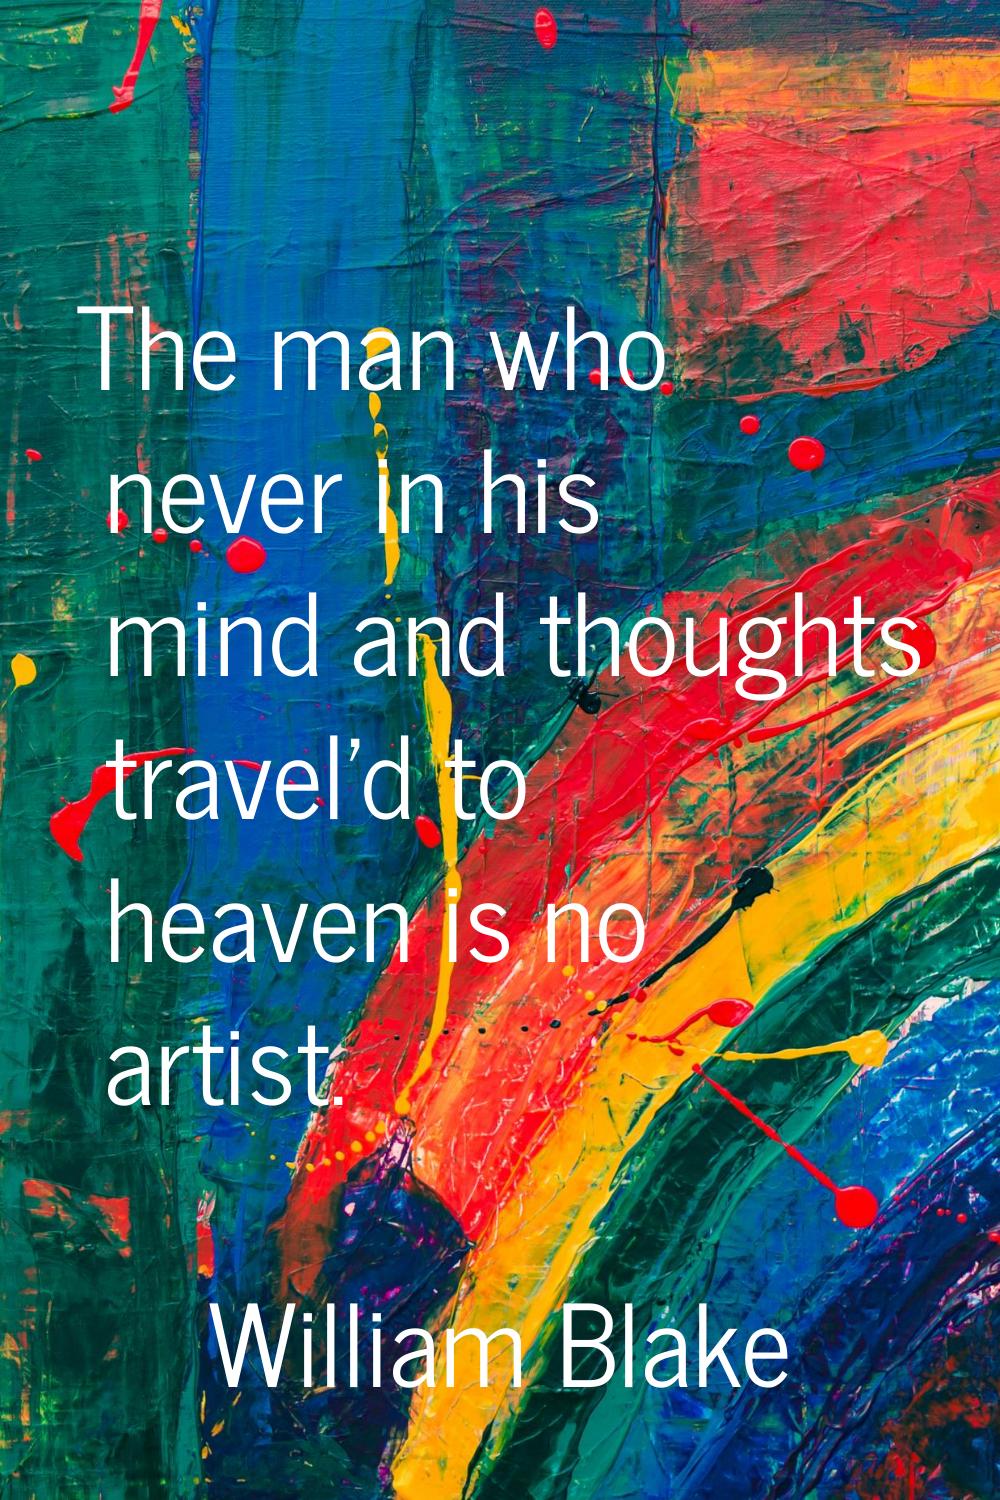 The man who never in his mind and thoughts travel'd to heaven is no artist.